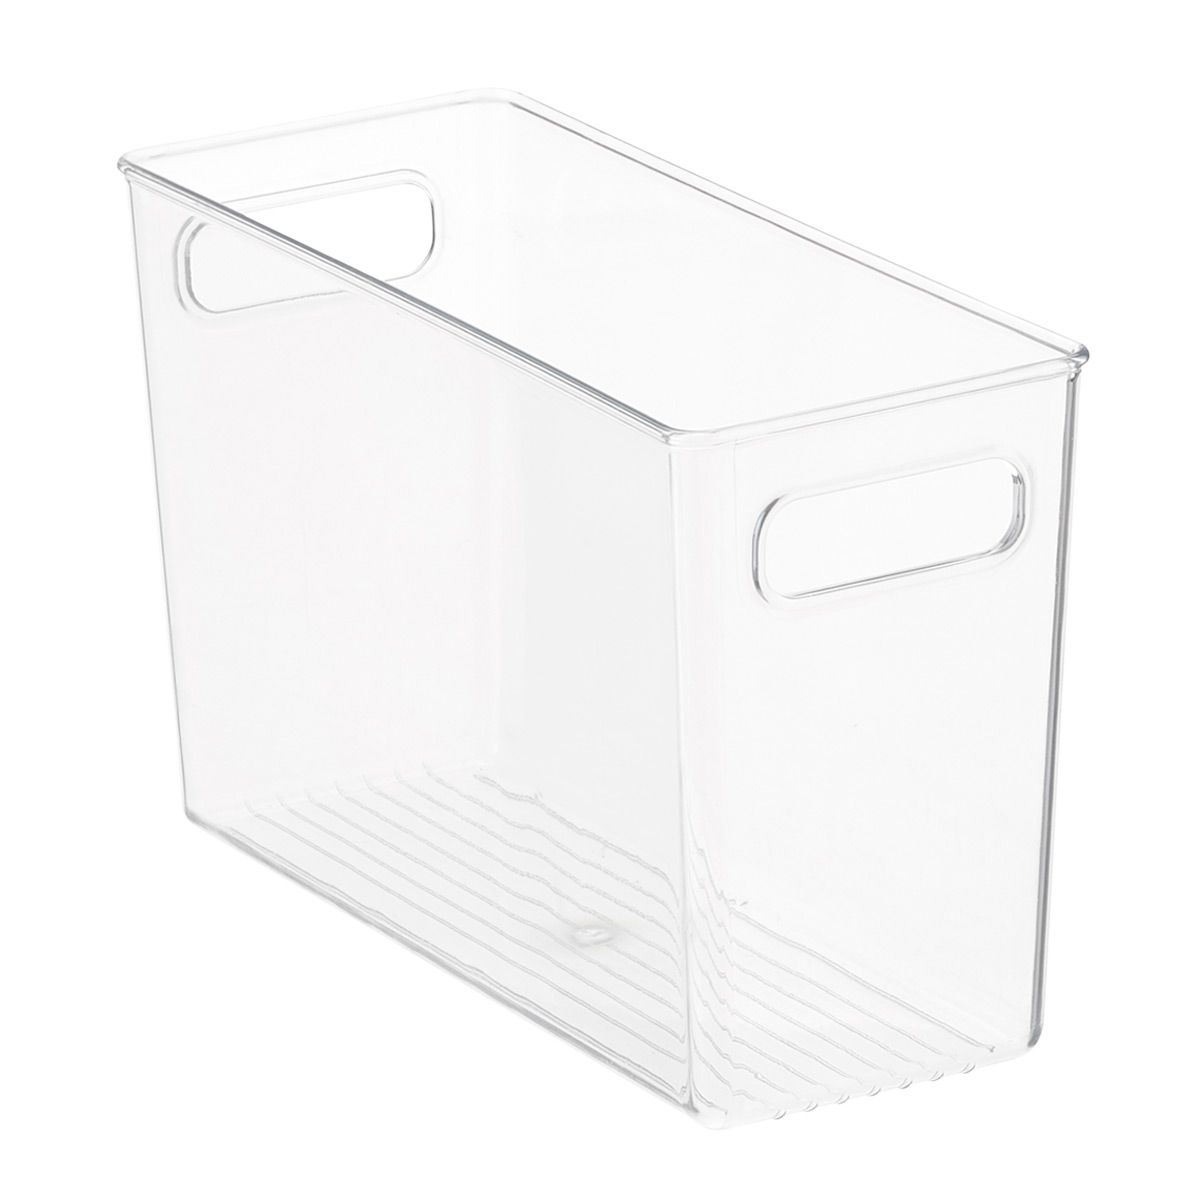 Linus^ Small Kitchen Bin | The Container Store